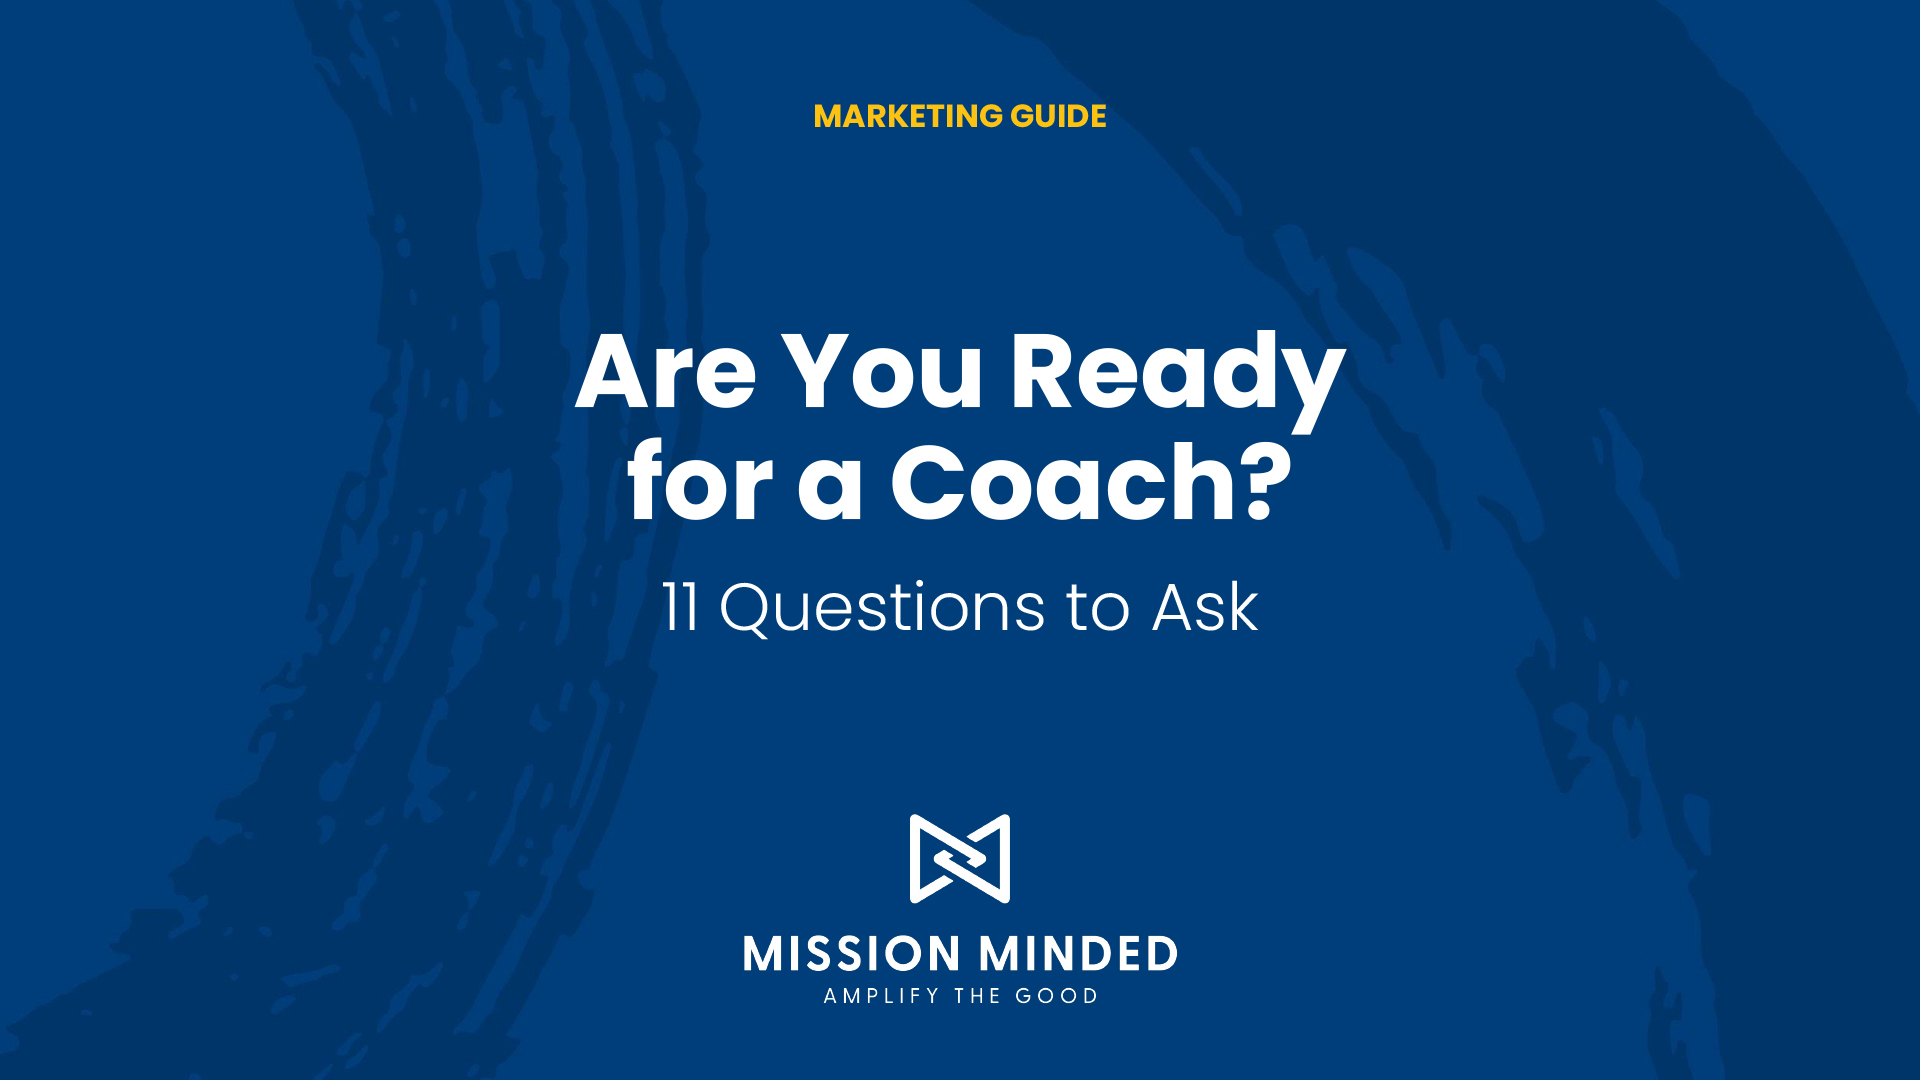 Are You Ready for a Coach?